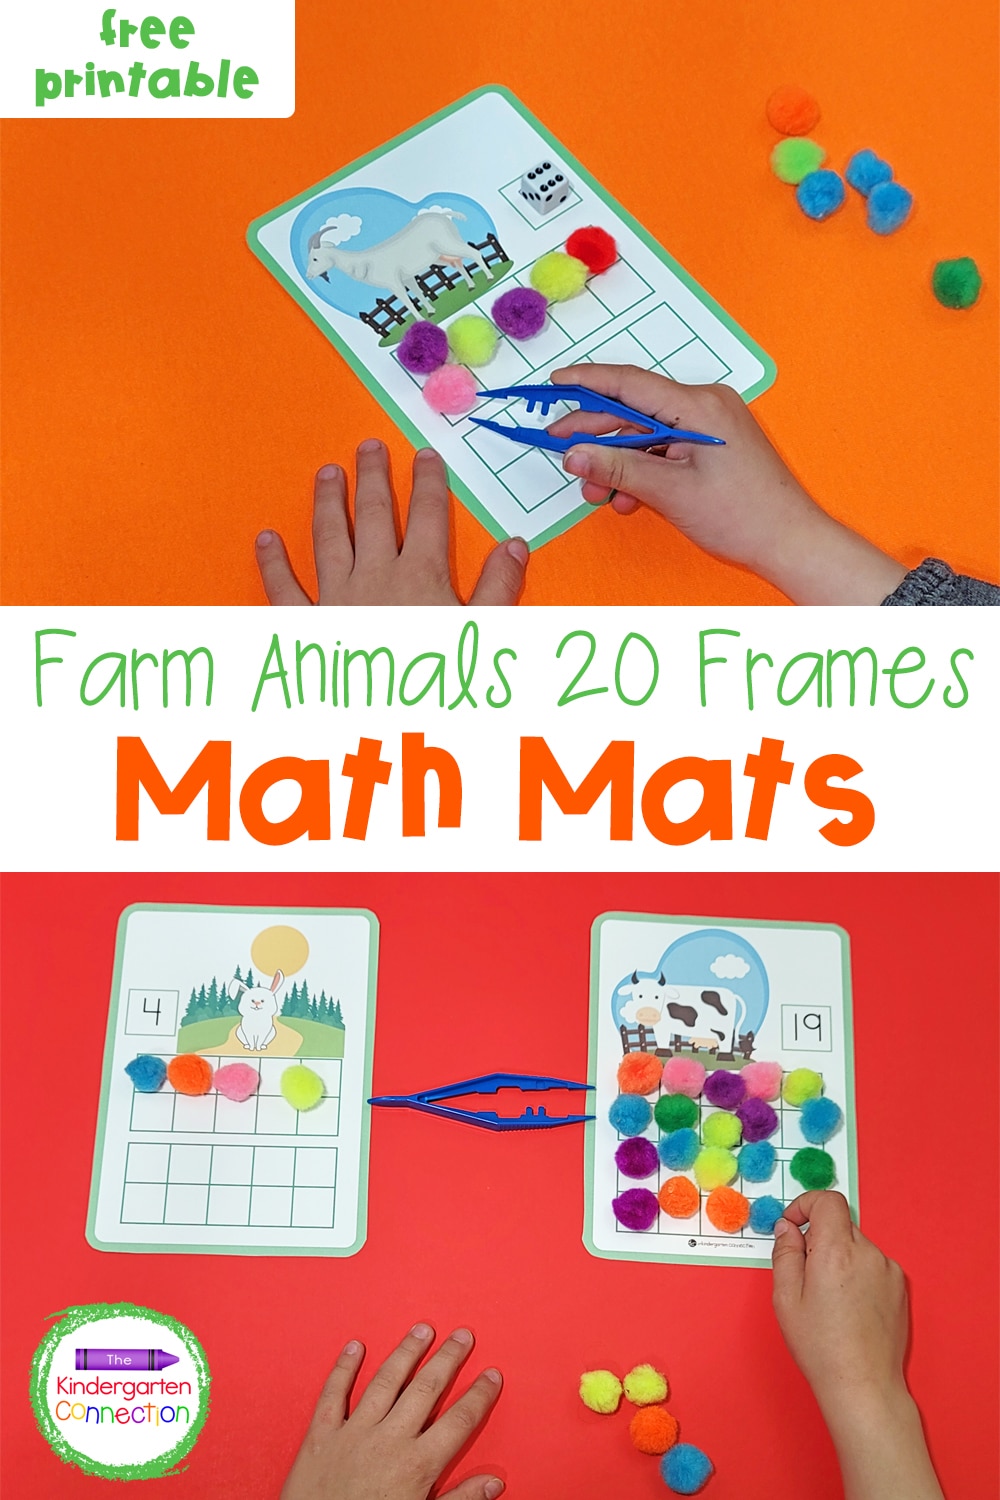 These free printable Farm Animal 20 Frames Math Mats are great for Kindergarten math centers or small groups!